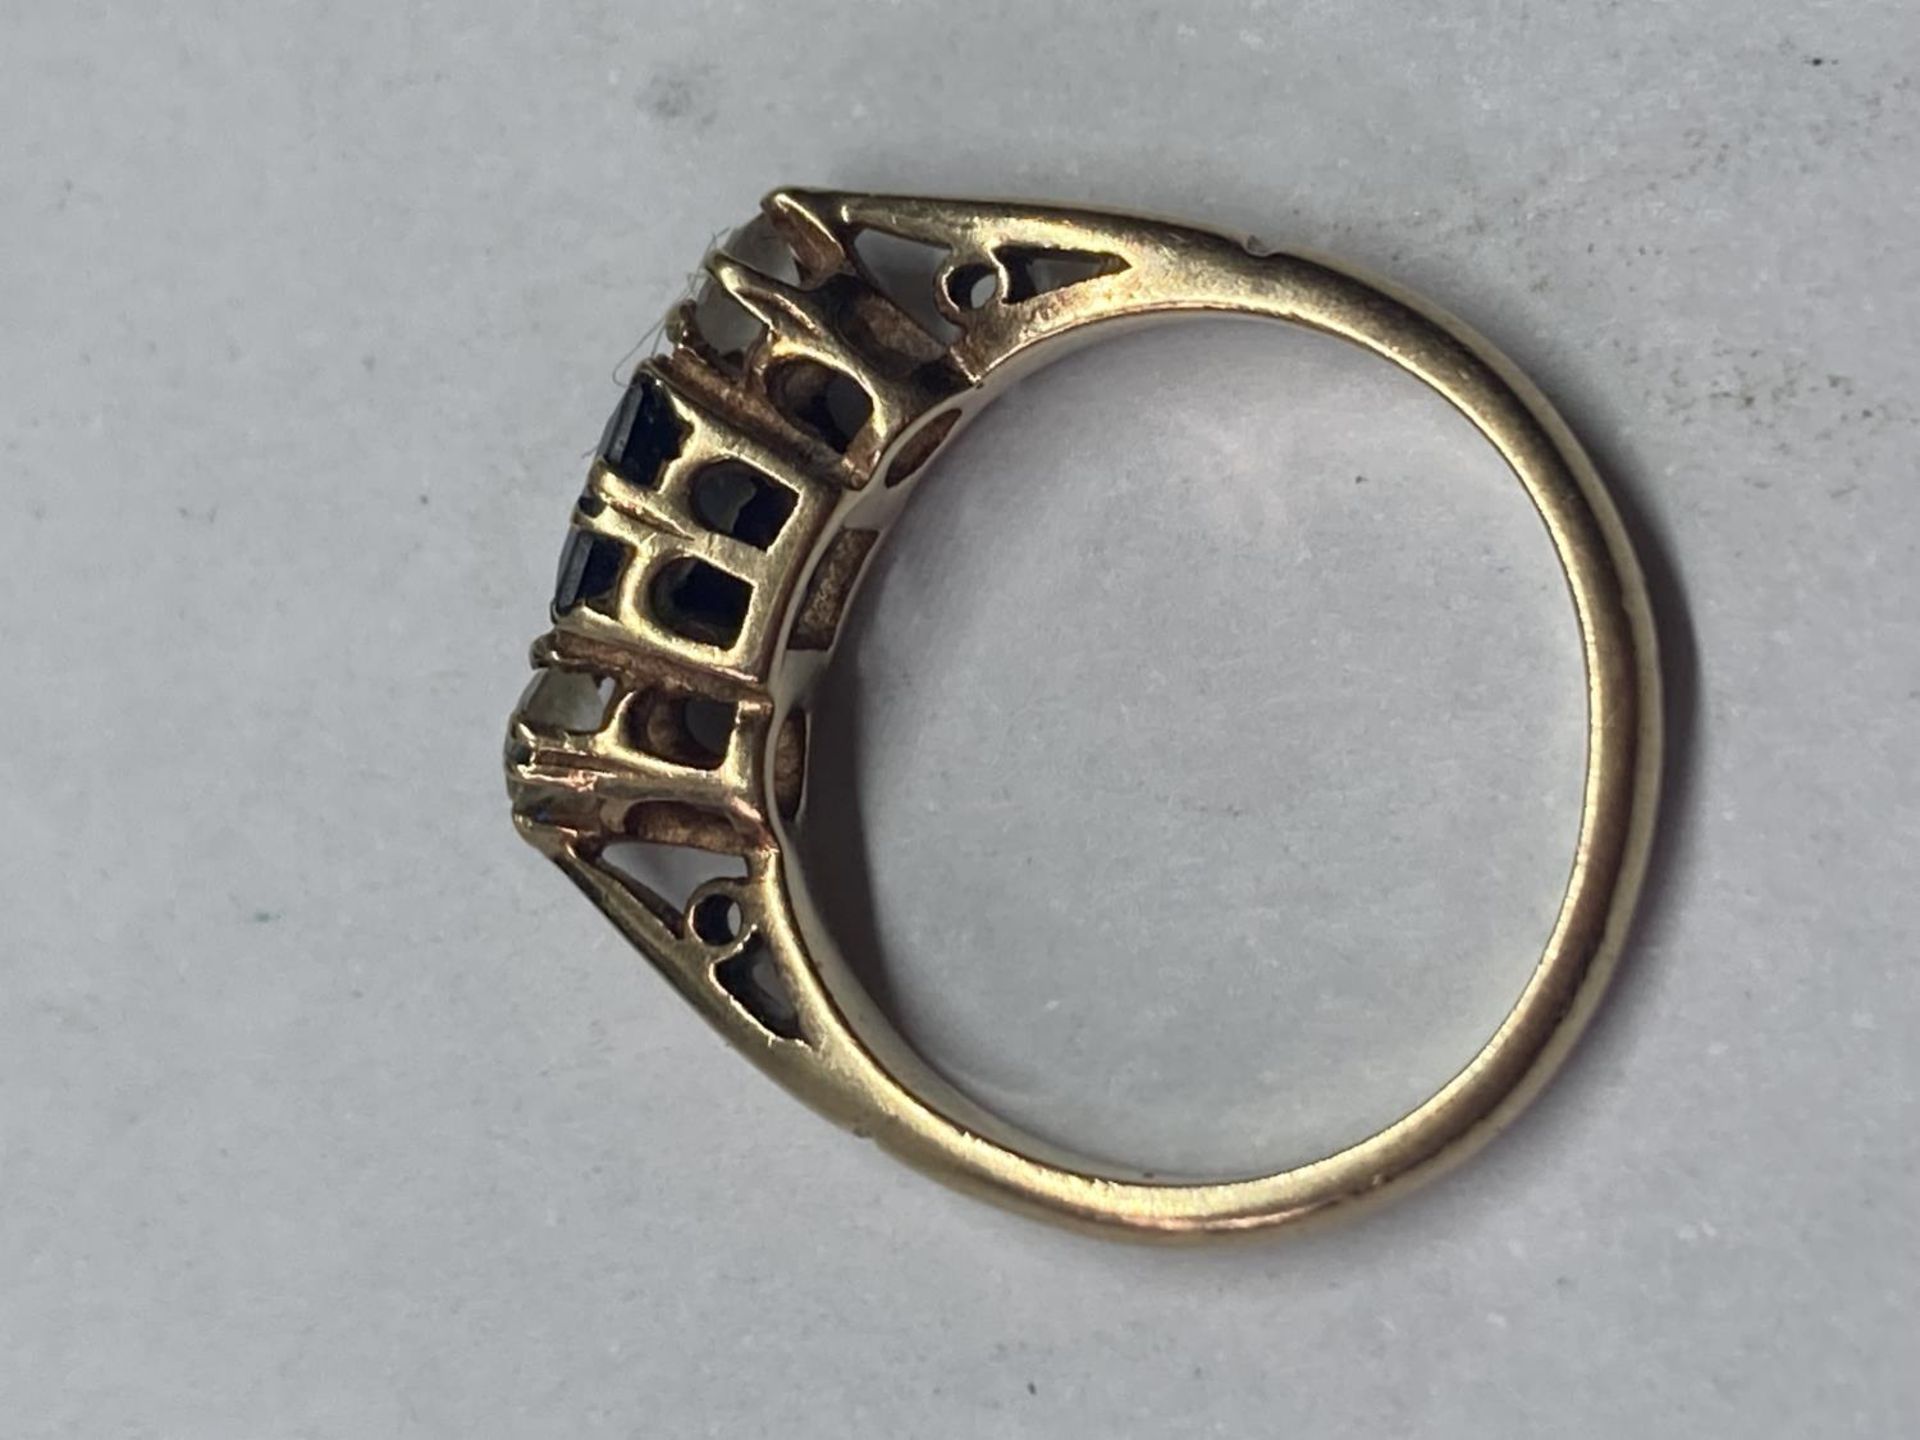 A 9 CARAT GOLD RING WITH CENTRE SAPPHIRE AND CUBIC ZIRCONIAS - Image 3 of 3